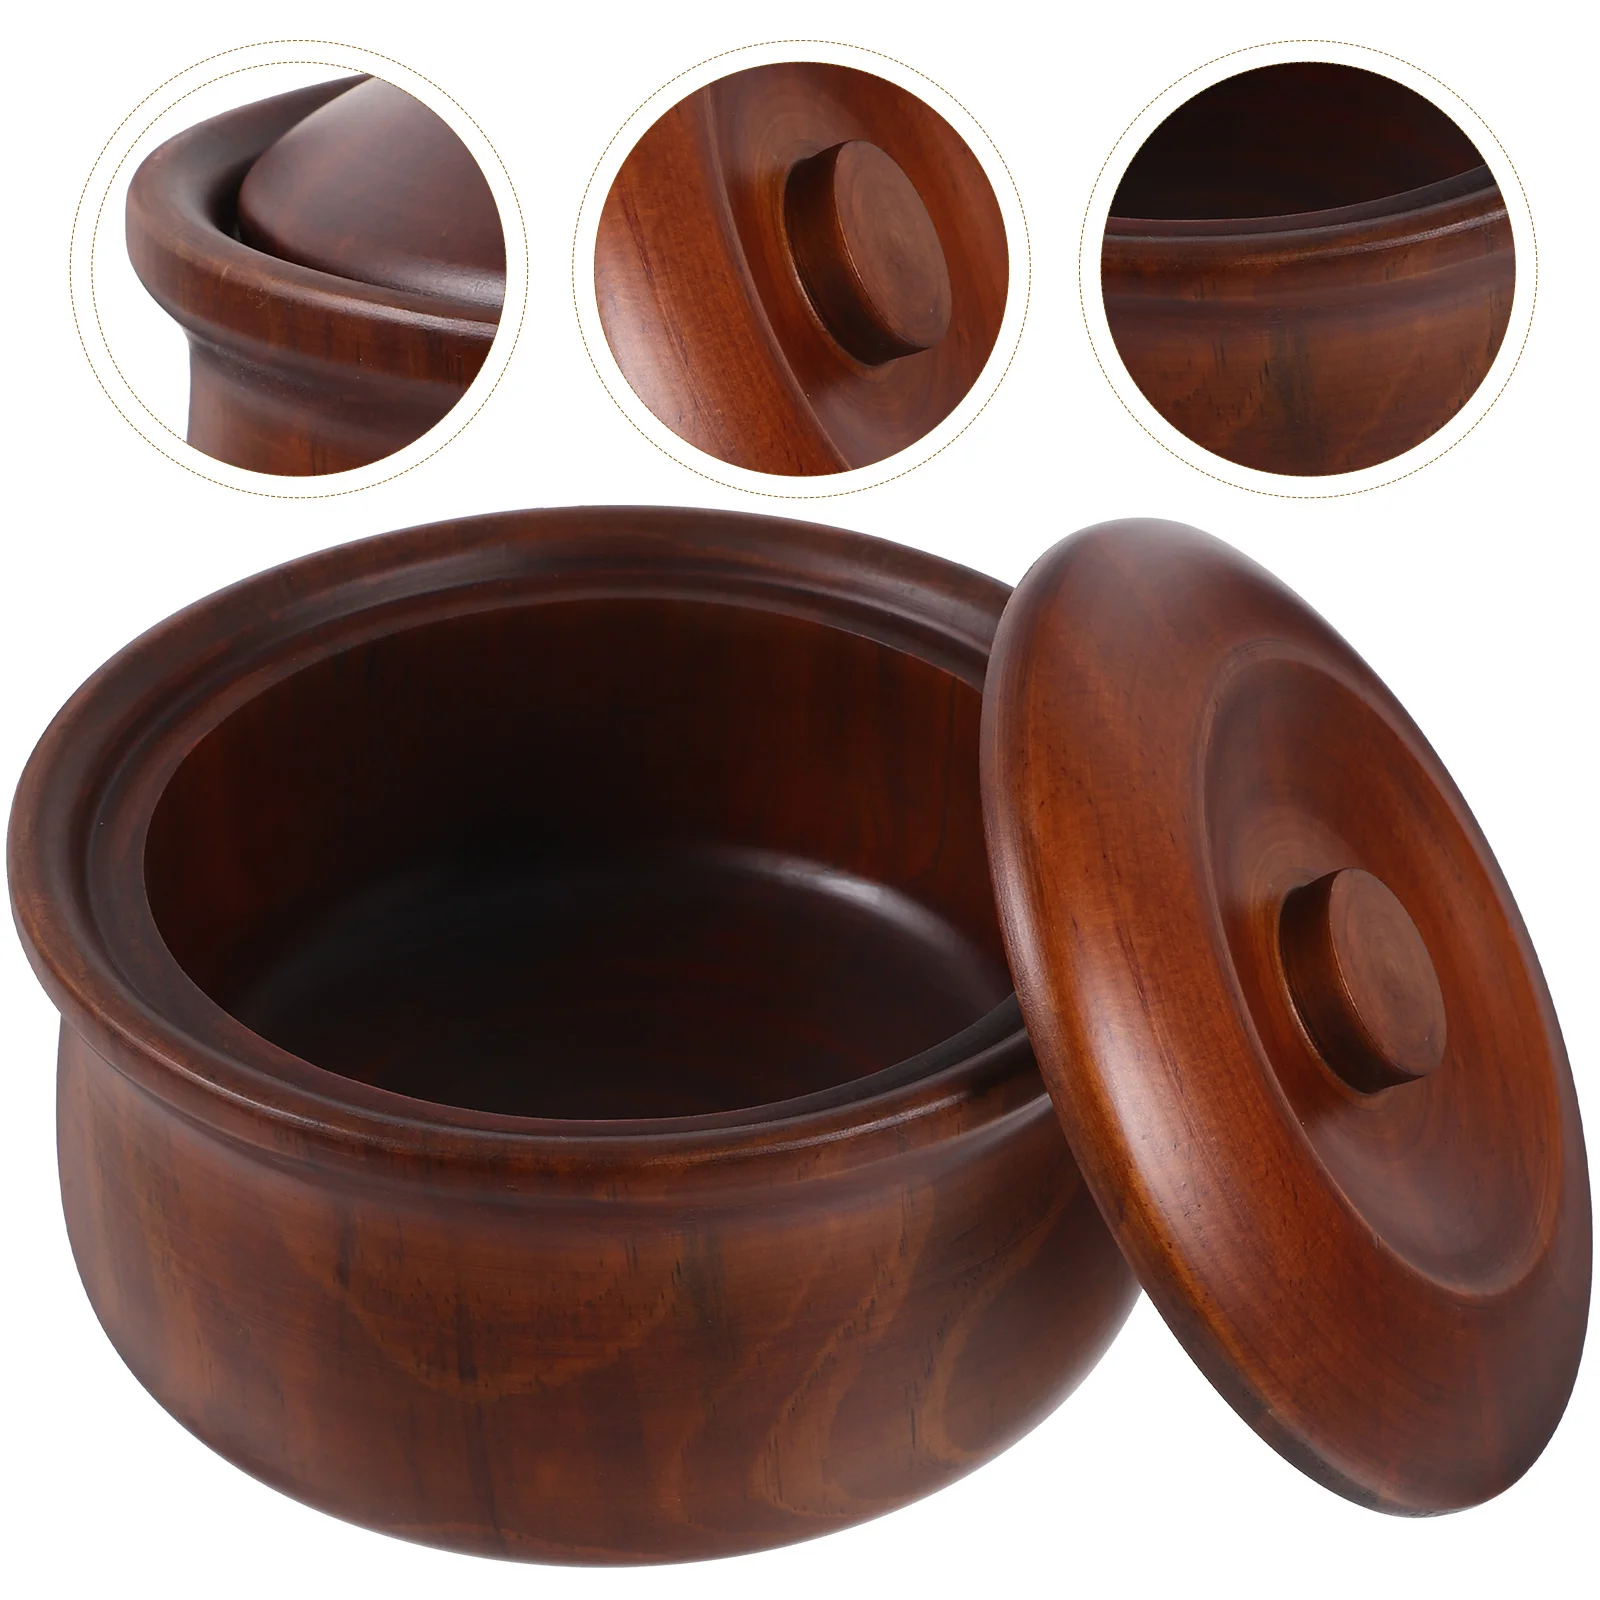 

Wood Bowl with Lid Serving Dishes Wood Serving Platter Fruit Plate Bowl Appetizer Snack Tray Fruits Bowl for Home Store